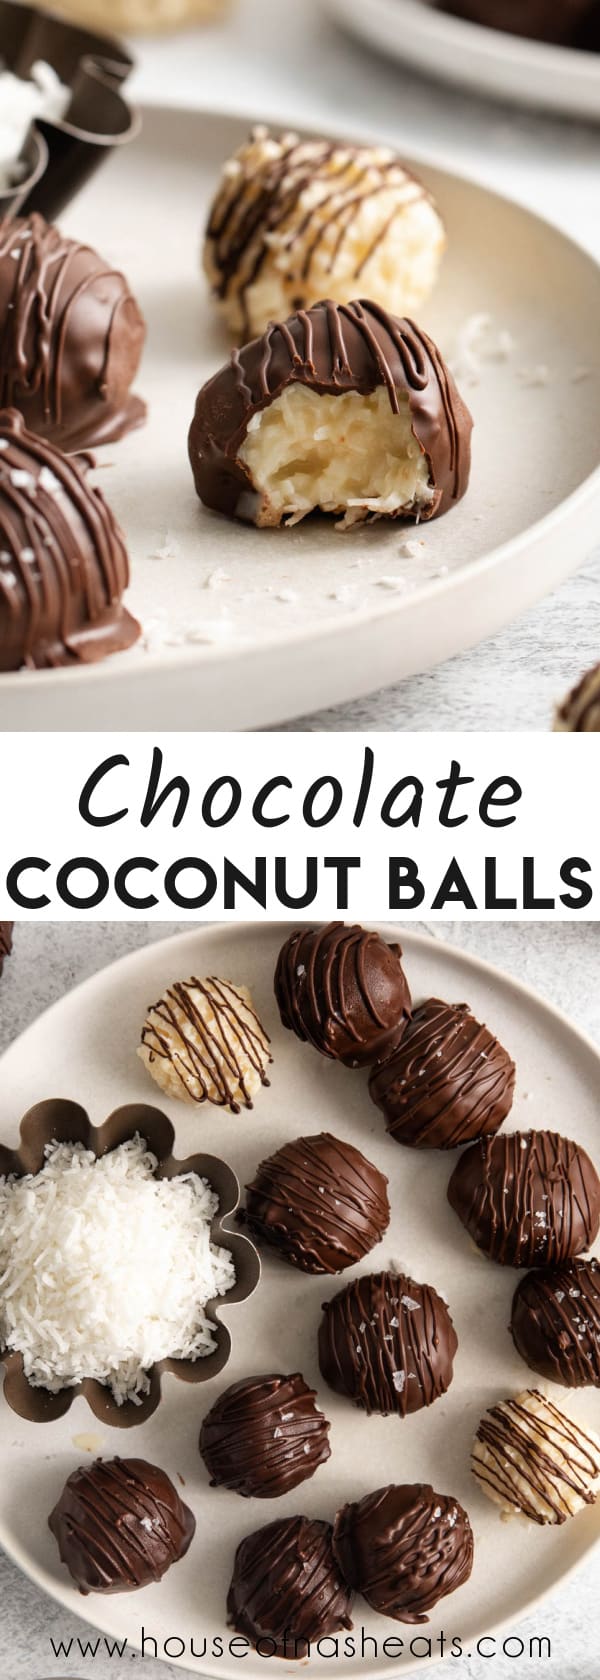 A collage of images of chocolate coconut balls with text overlay.